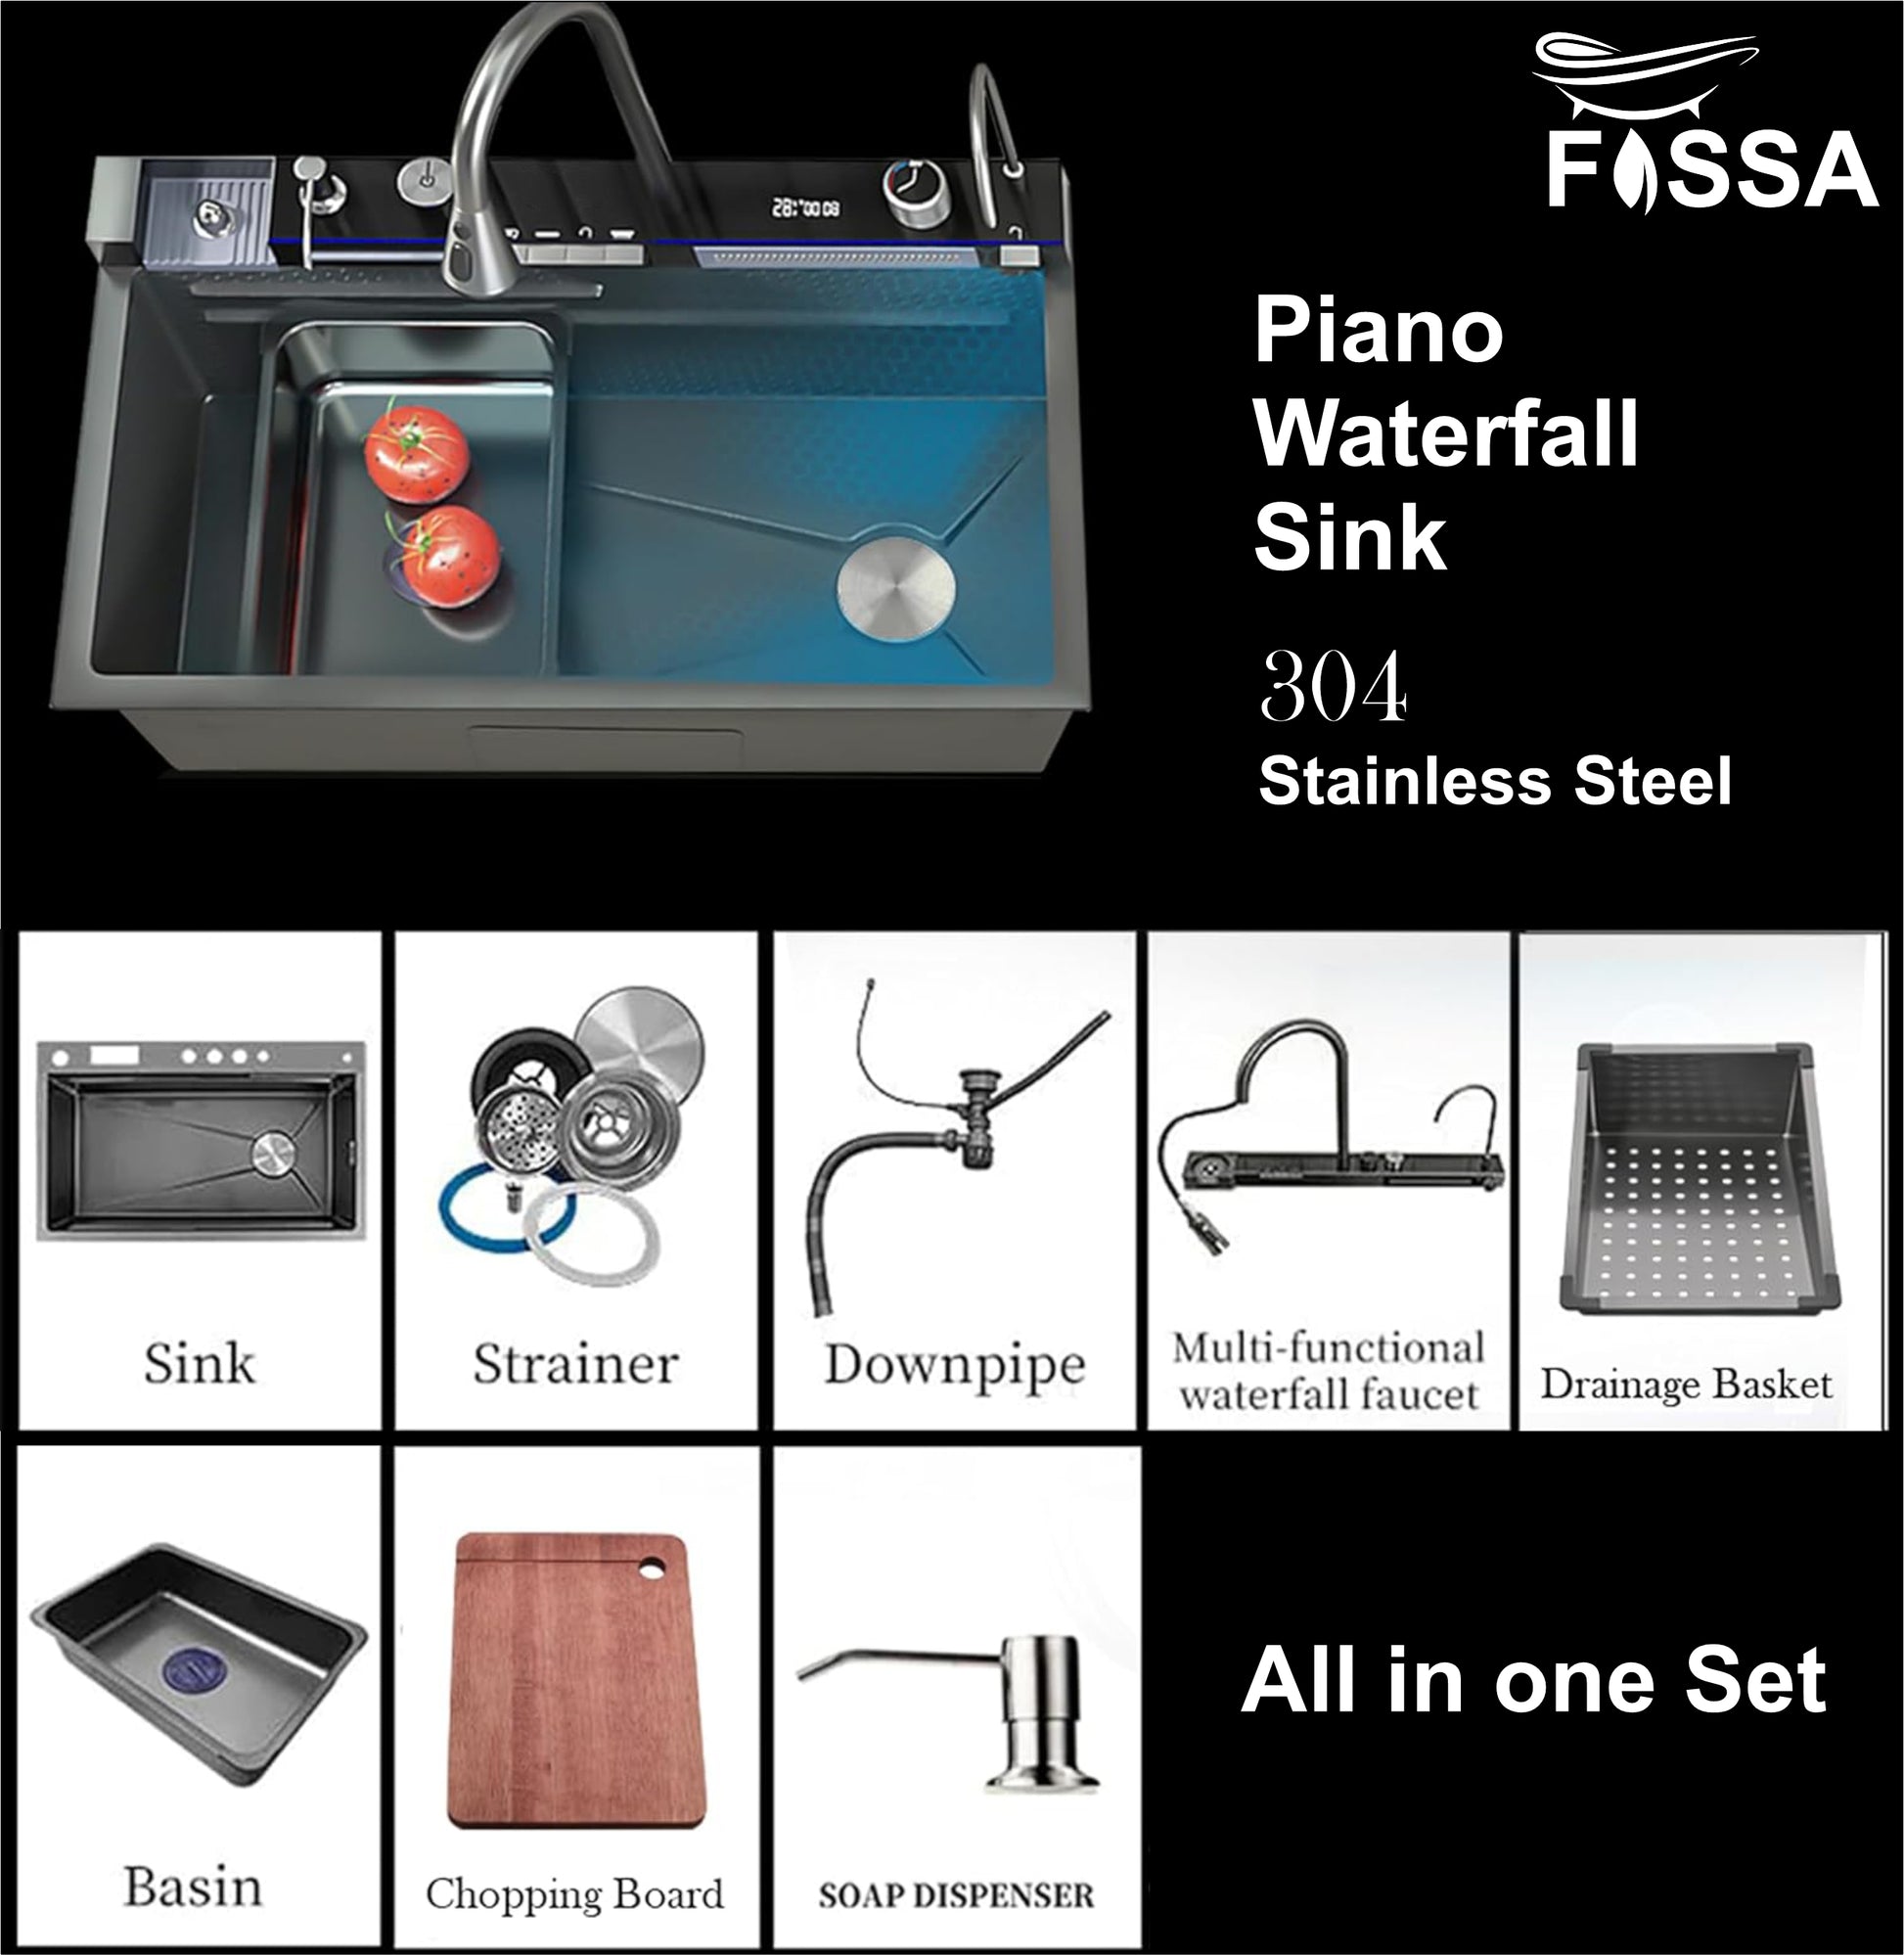 Fossa 30x18x10 Inch Piano Fully Equipped Kitchen Sink with Integrated Waterfall and Pull-down Faucets - Premium Stainless Steel Sink with LED Pannel and Digital Display - Nano Black Finish Fossa Home